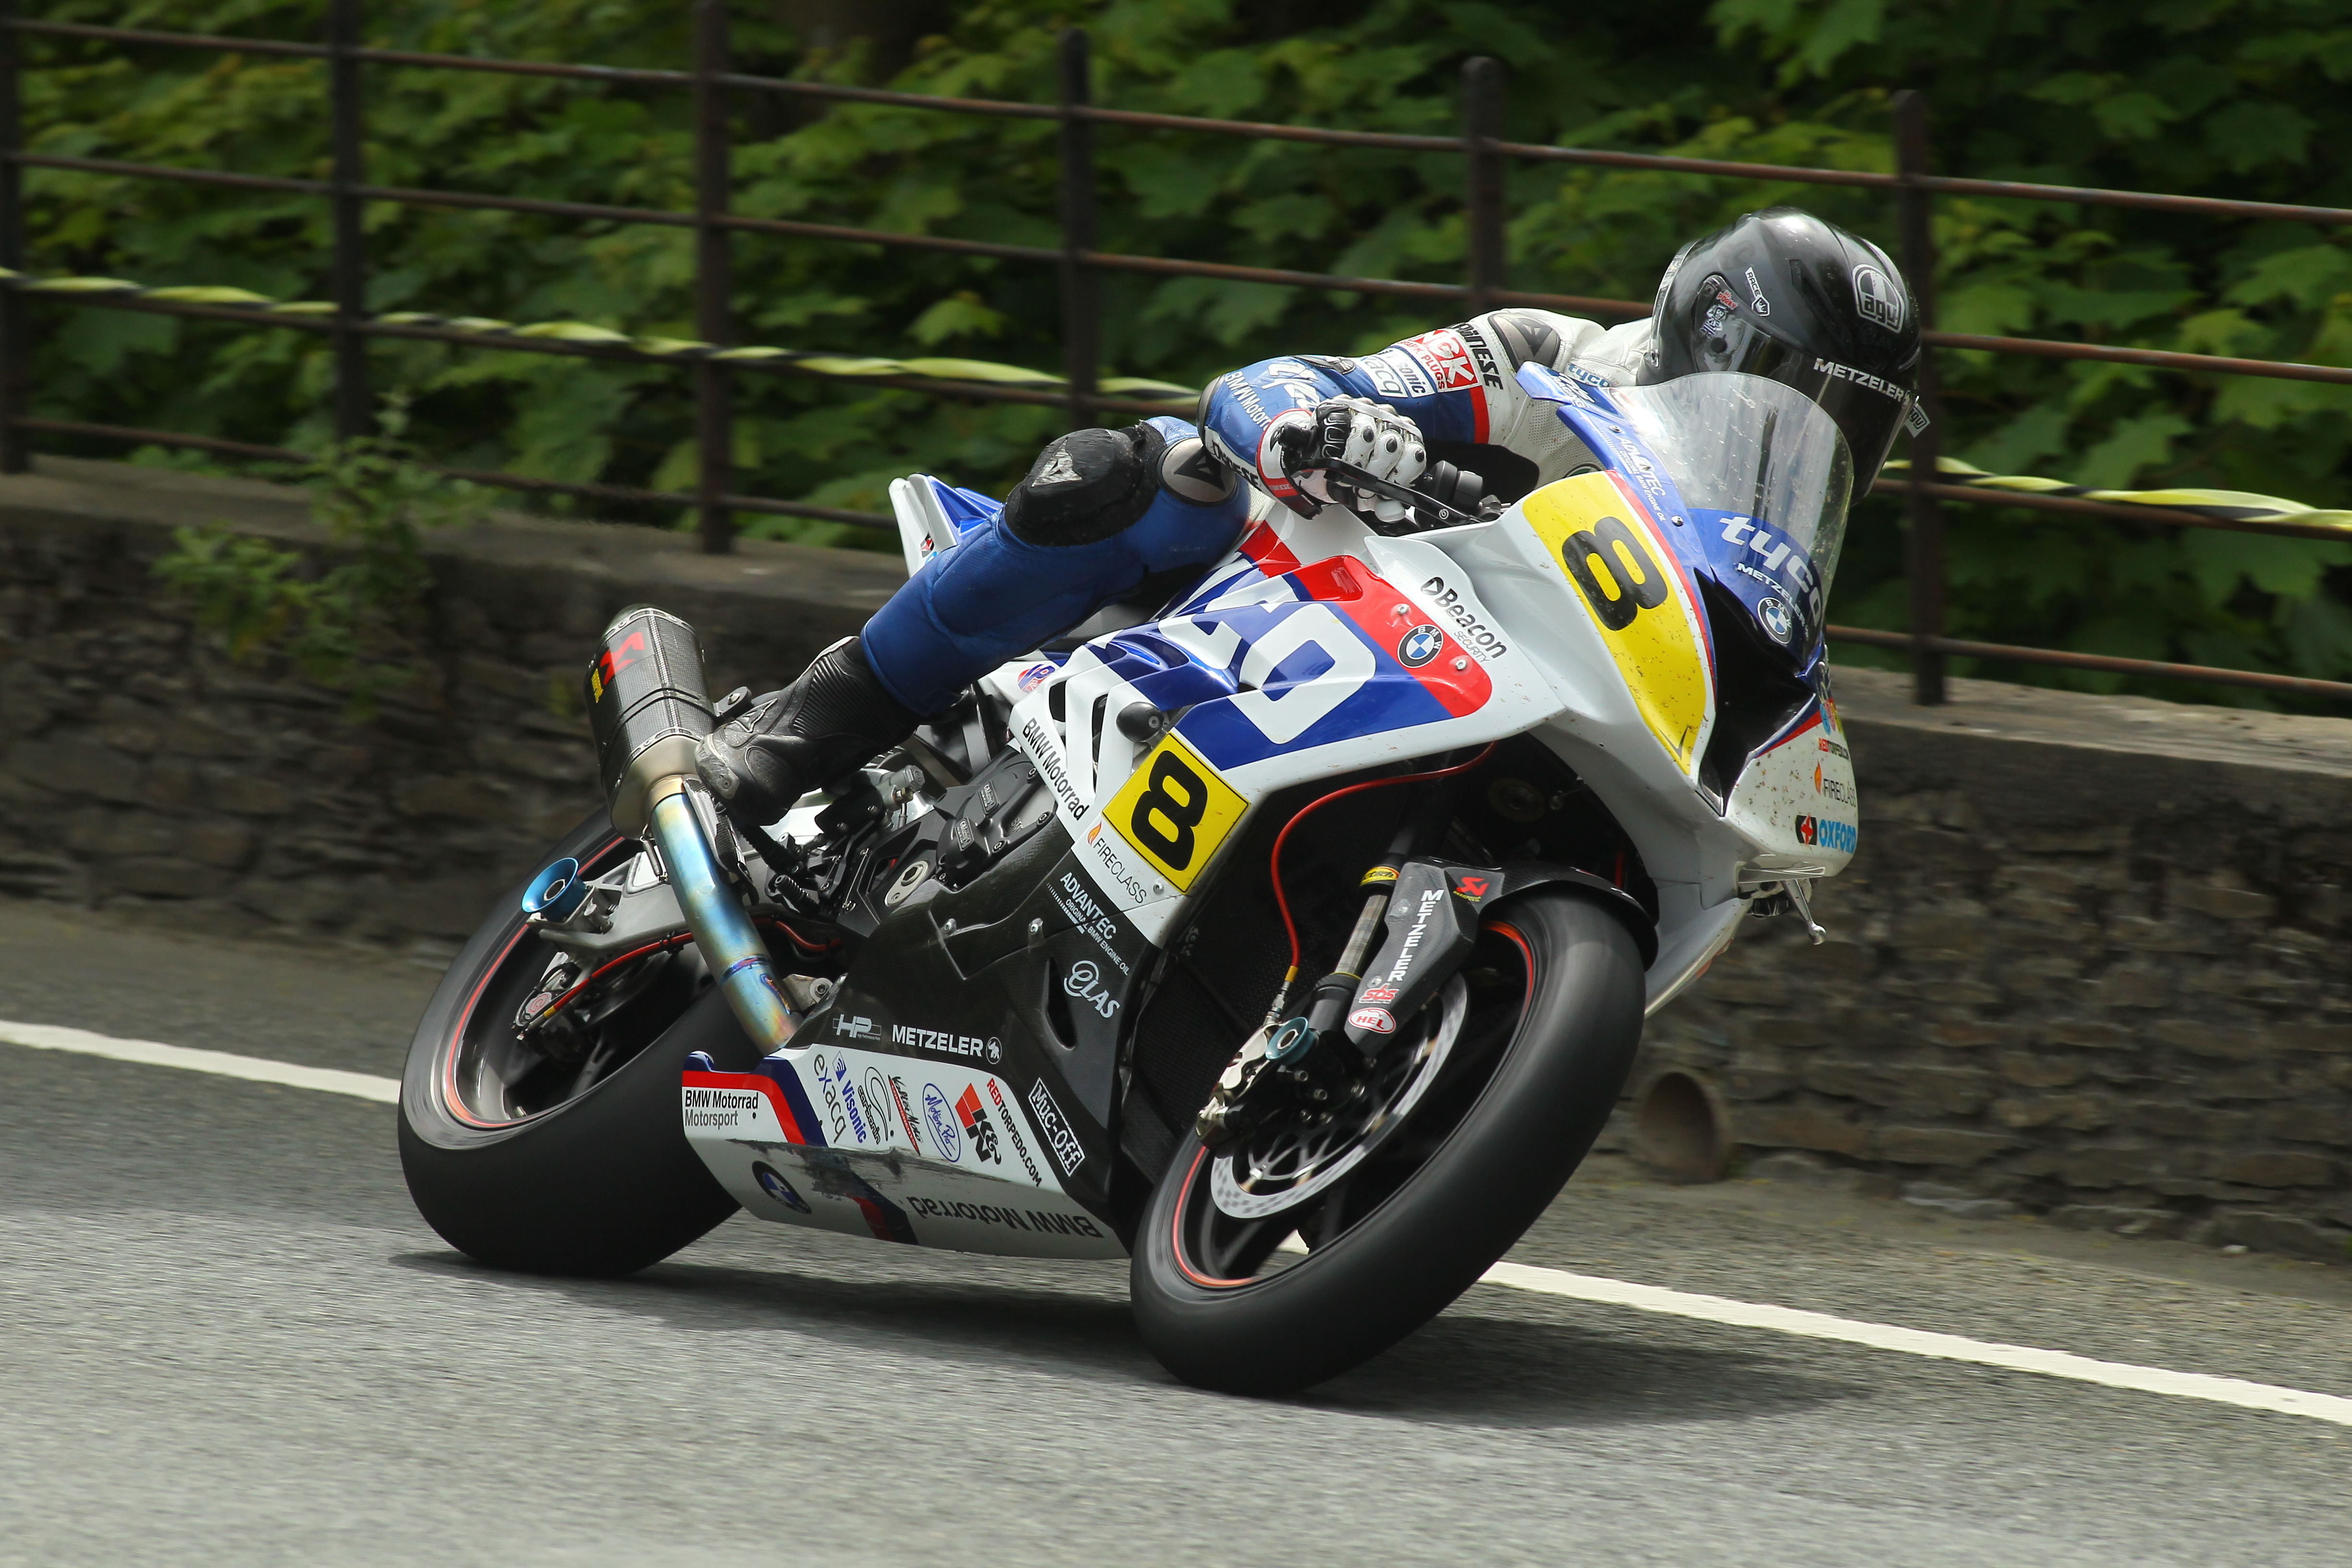 Guy en-route to his fastest ever lap at the TT [132.398mp] aboard the Tyco BMW S1000RR Superbike